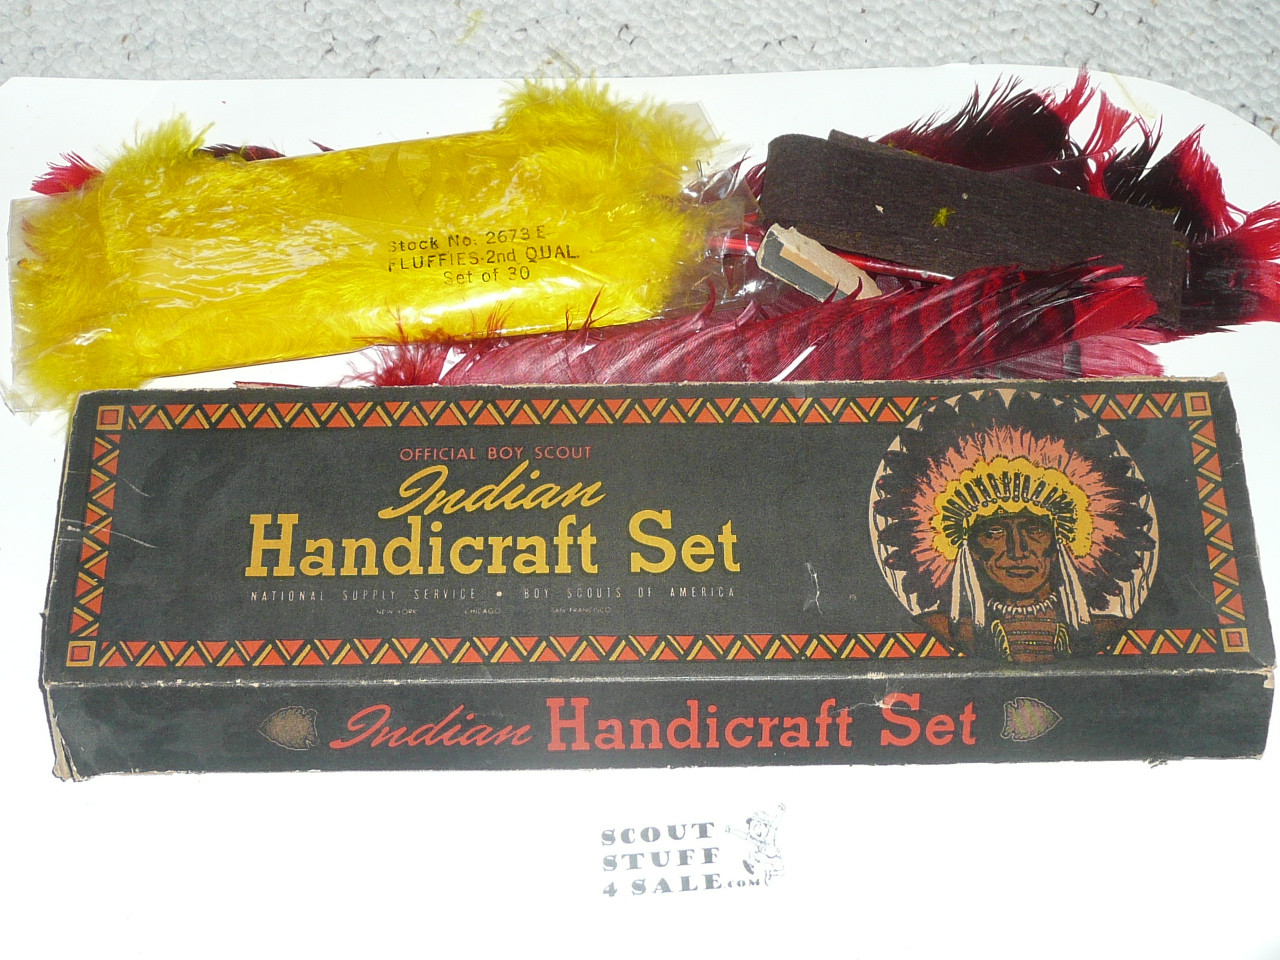 1950's Boy Scout Indian Handicraft Set, used with most materials in original box